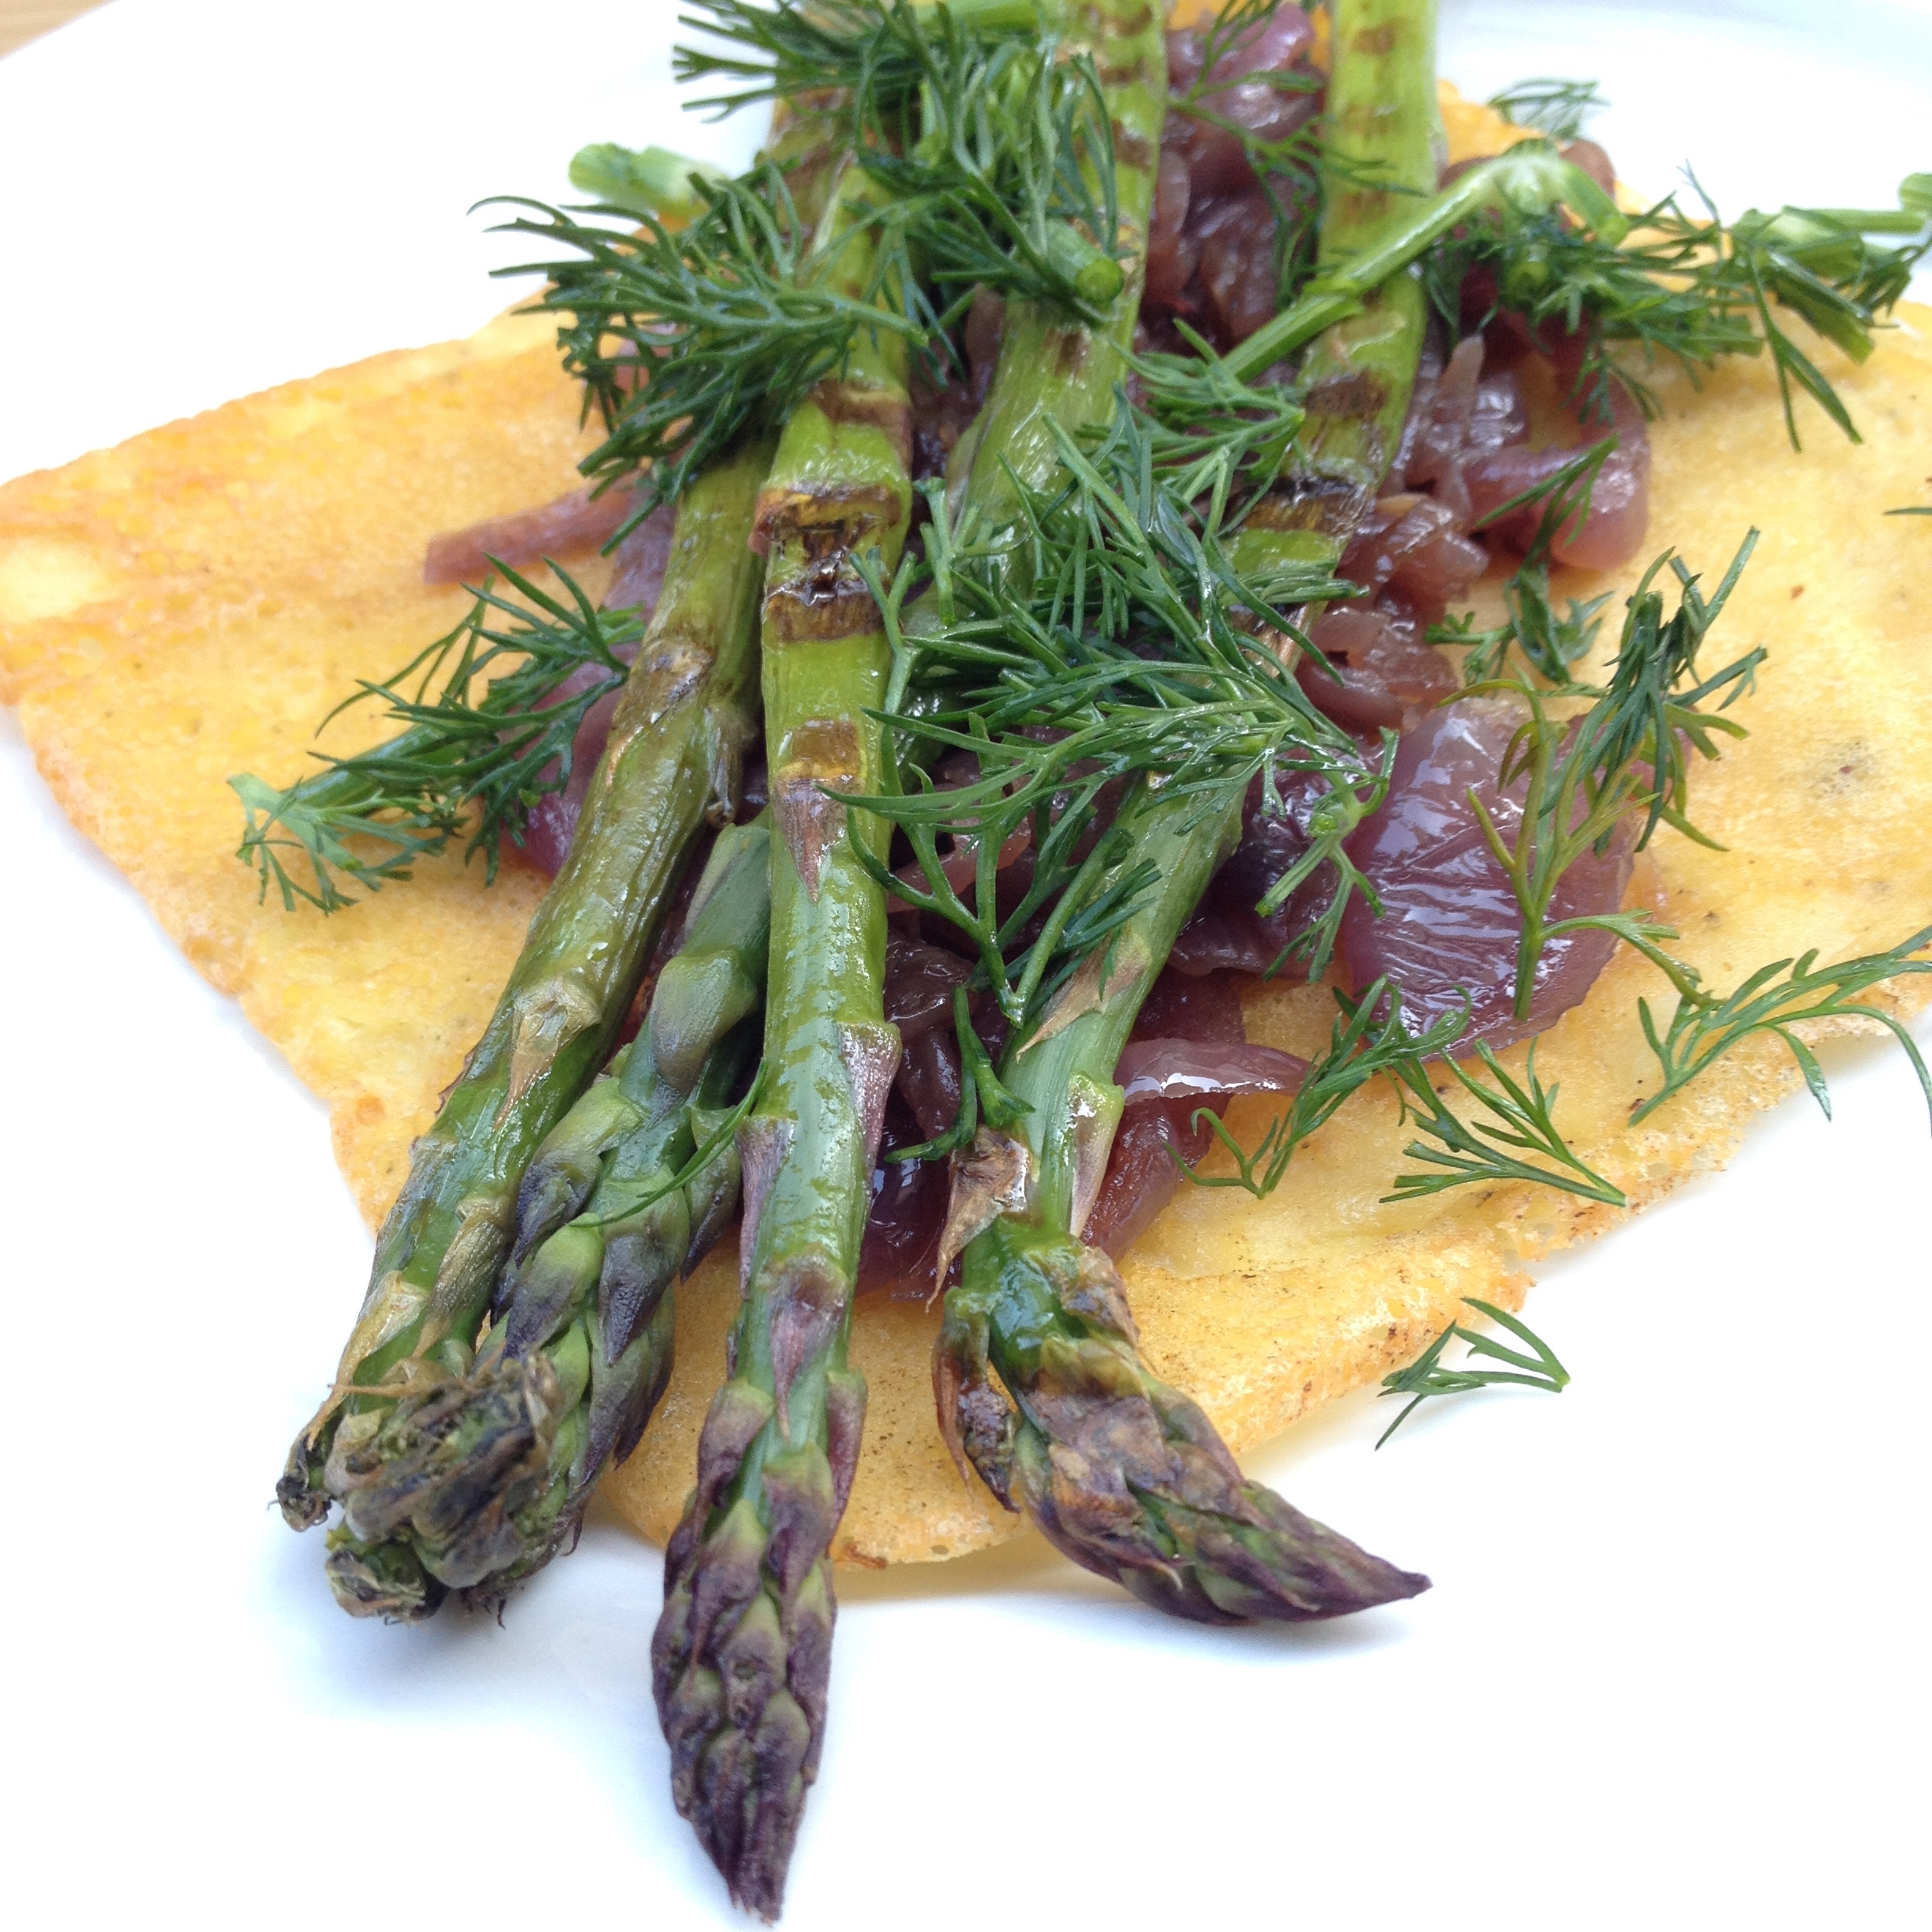 Day 2: My New Roots Challenge – Review of Socca with Asparagus, Dill and Feta